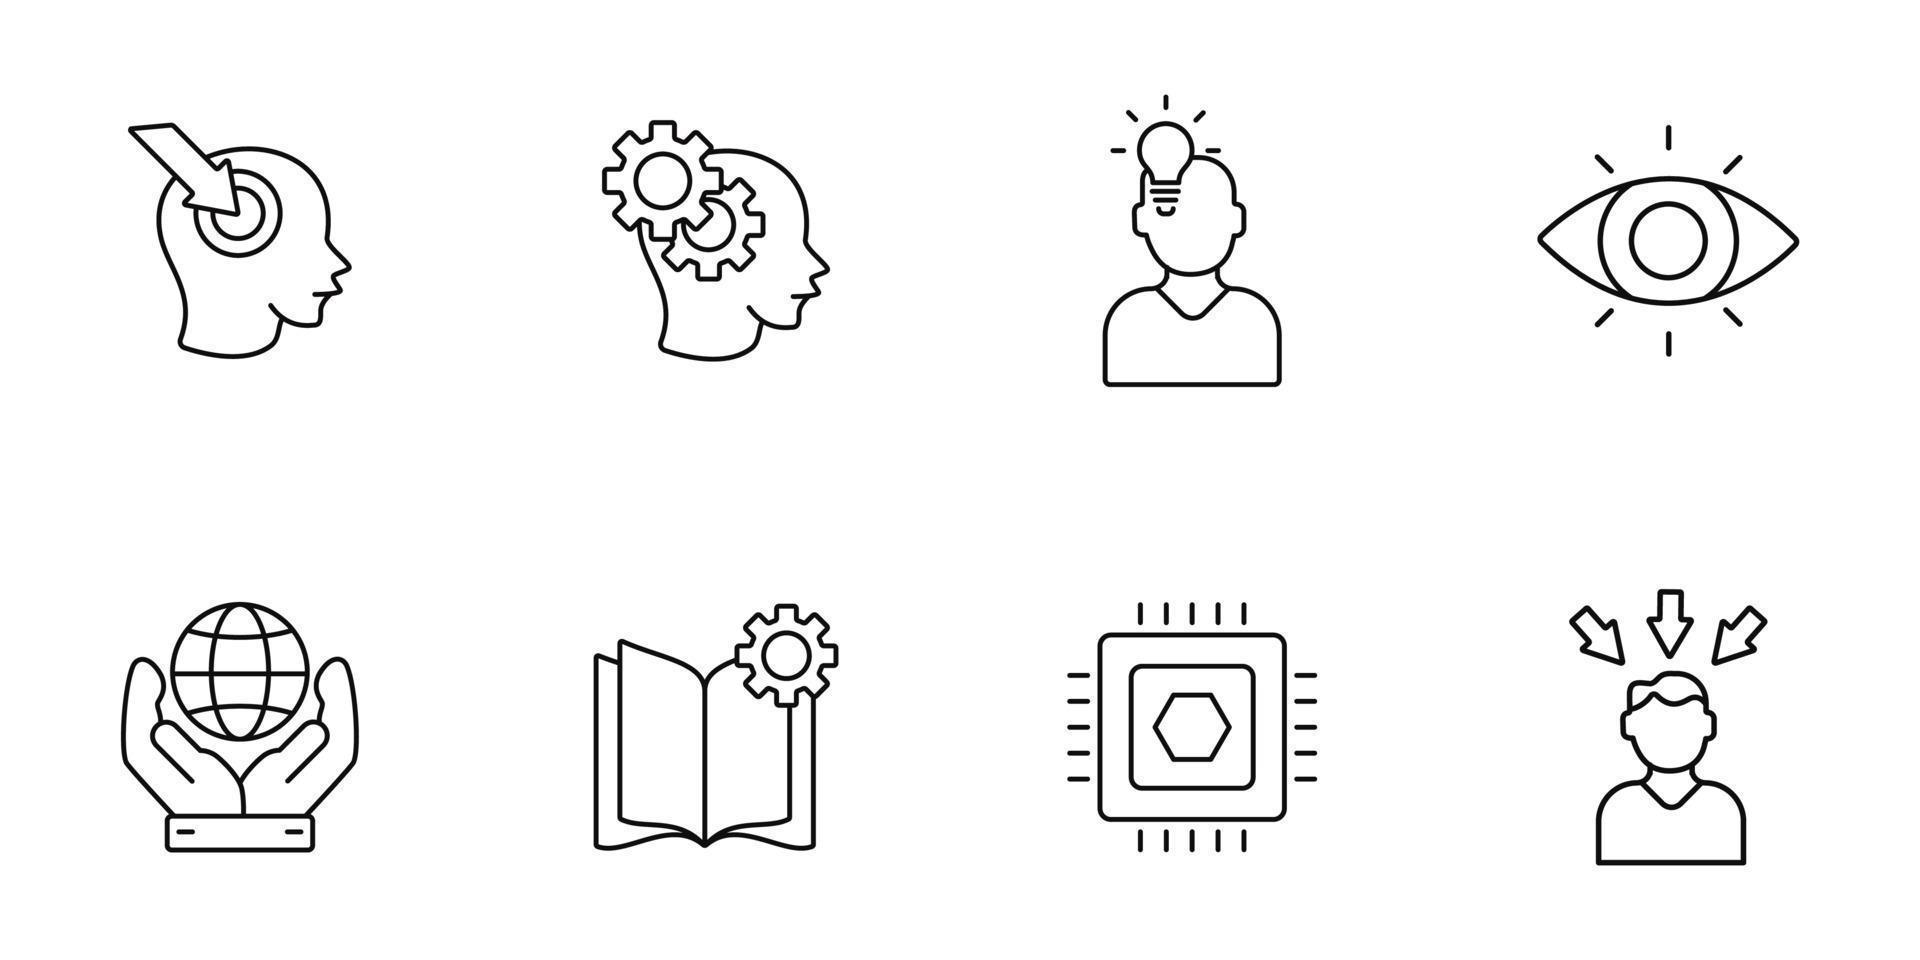 perception icons set . perception pack symbol vector elements for infographic web